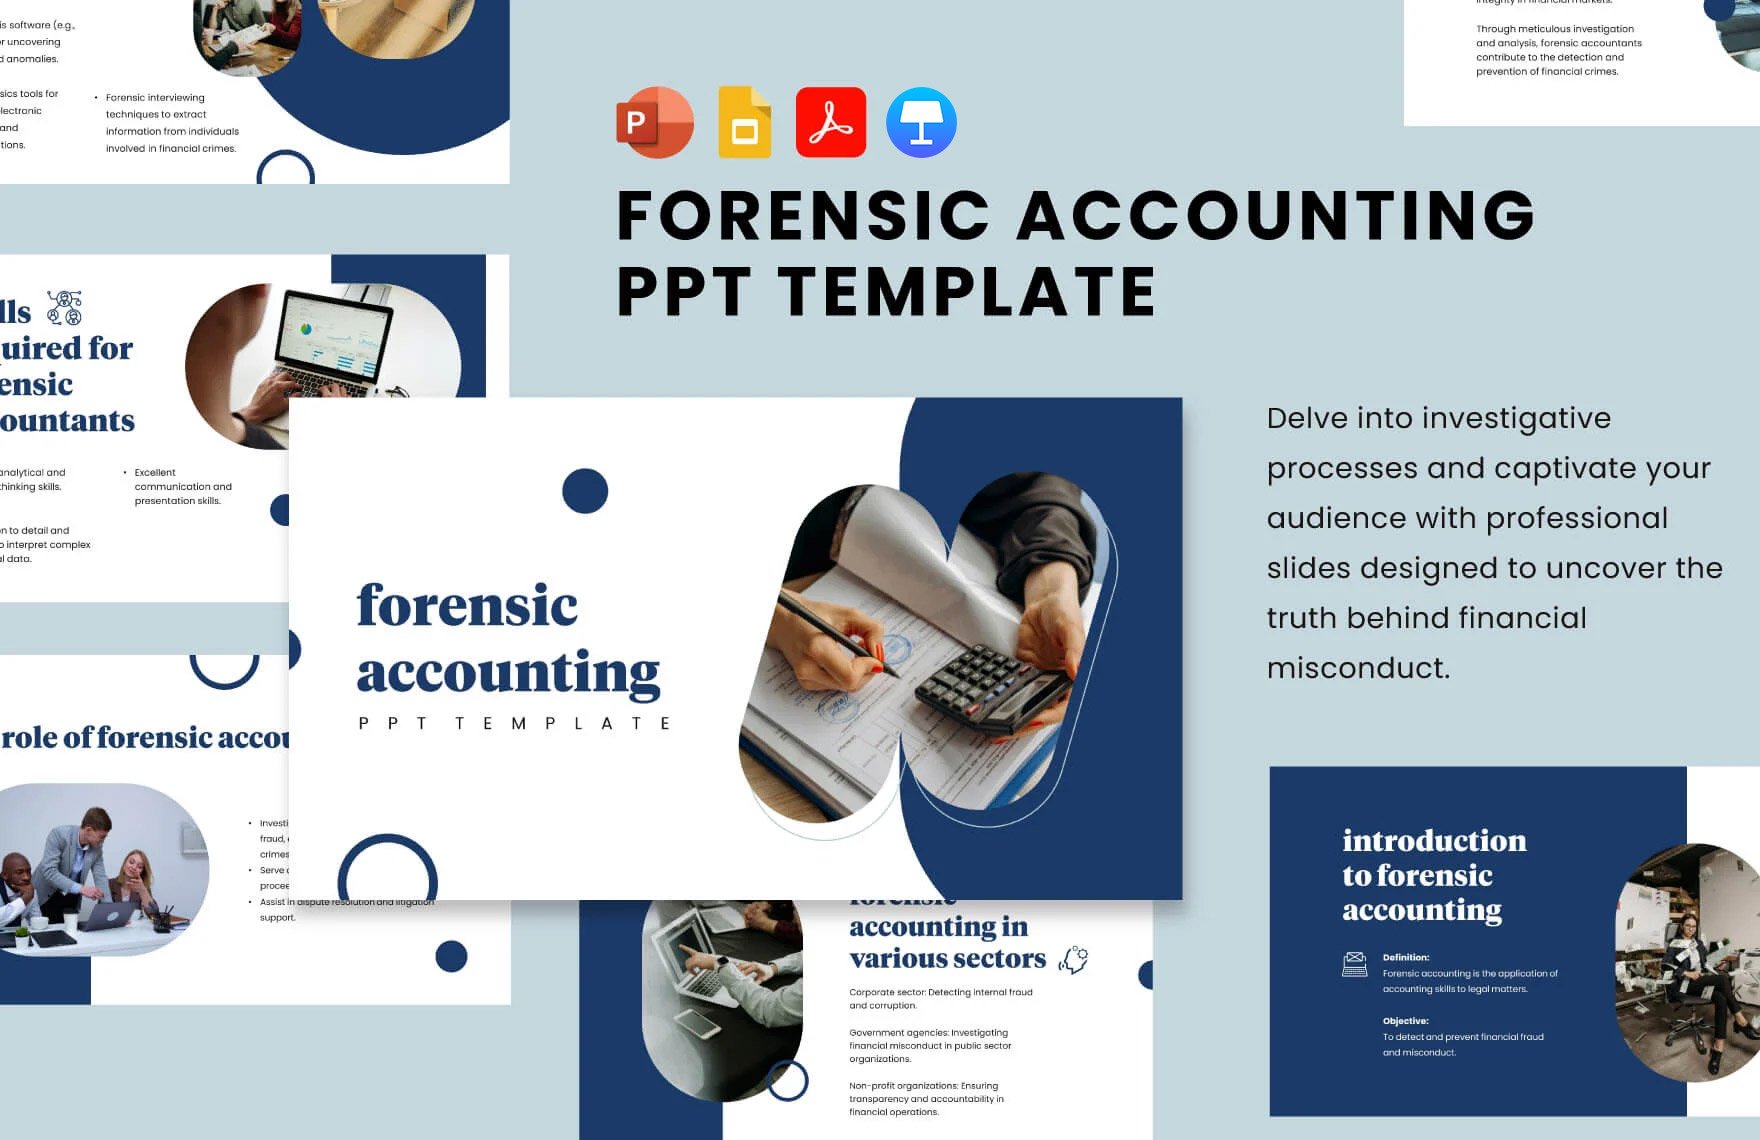 Forensic Accounting PPT Template in PDF, PowerPoint, Google Slides, Apple Keynote